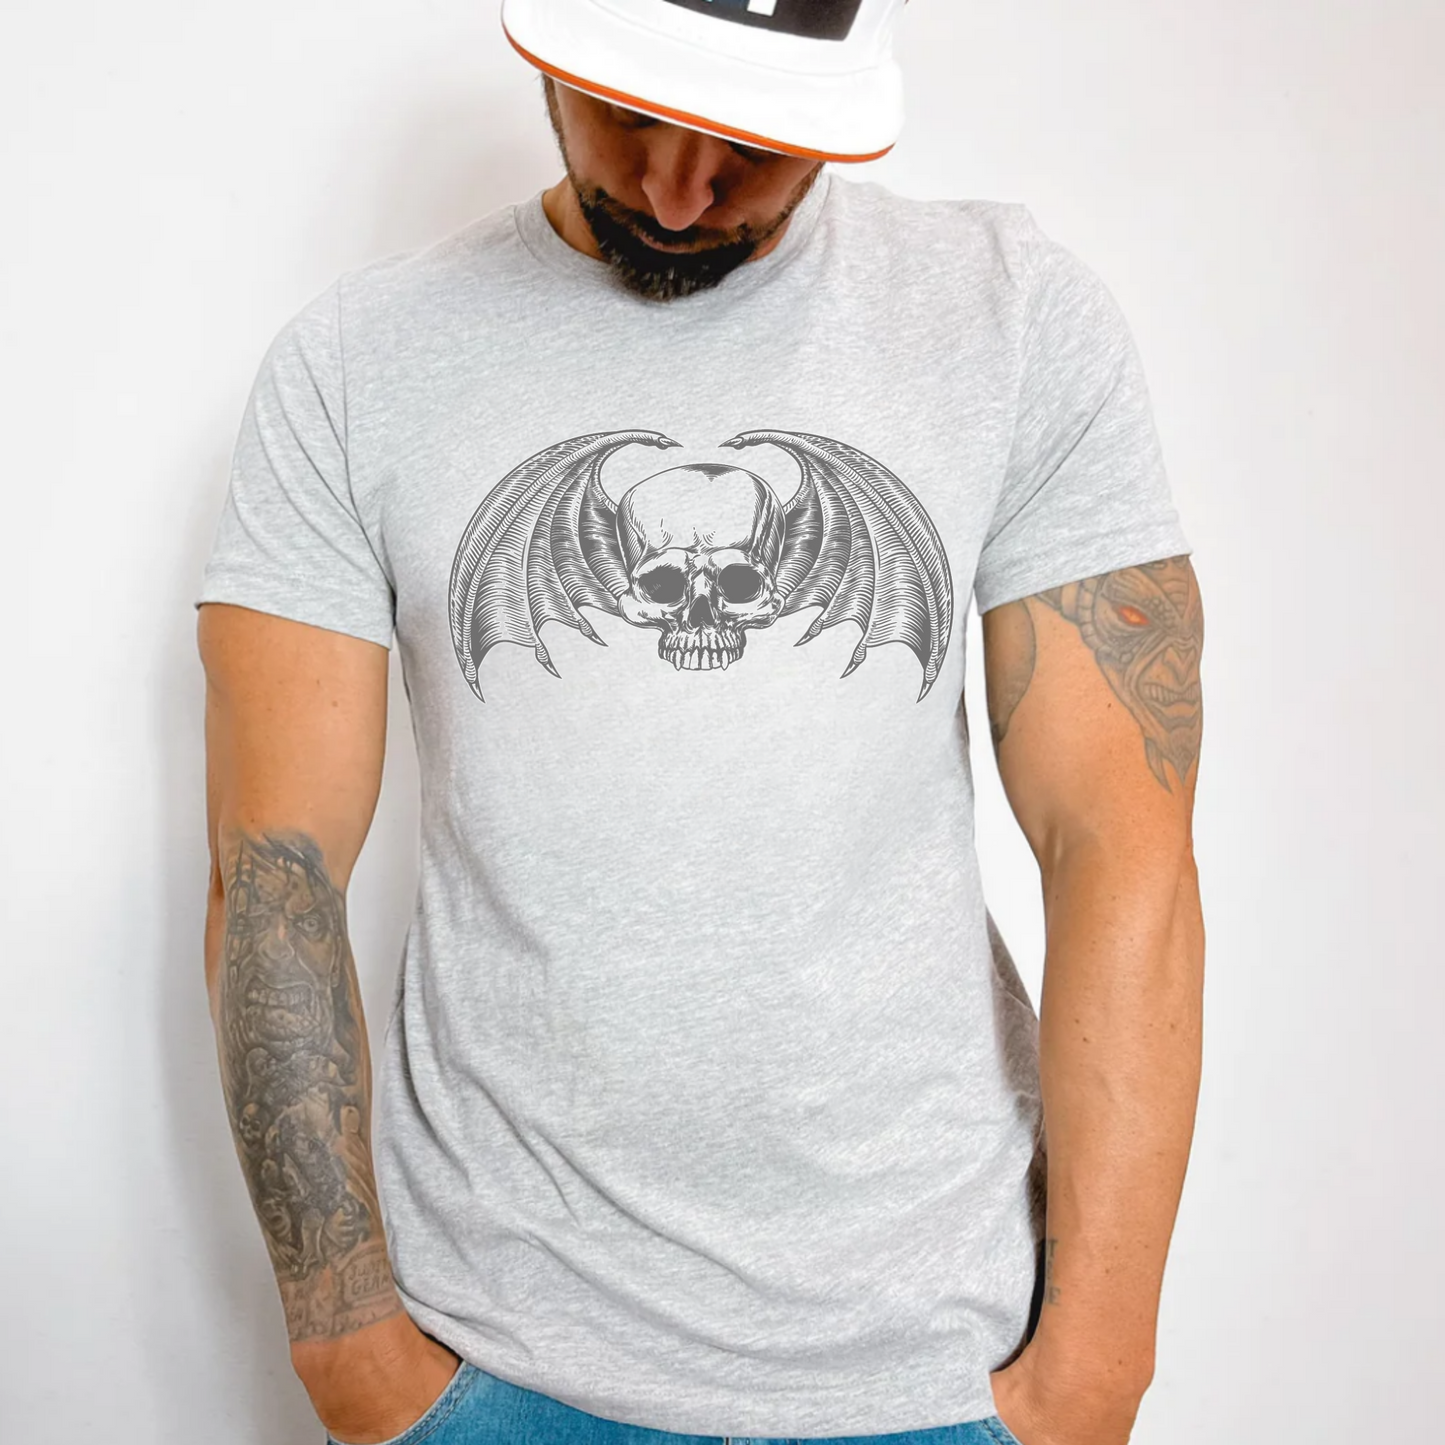 (shirt not included) Skull W/ Wings - Matte Clear Film Transfer